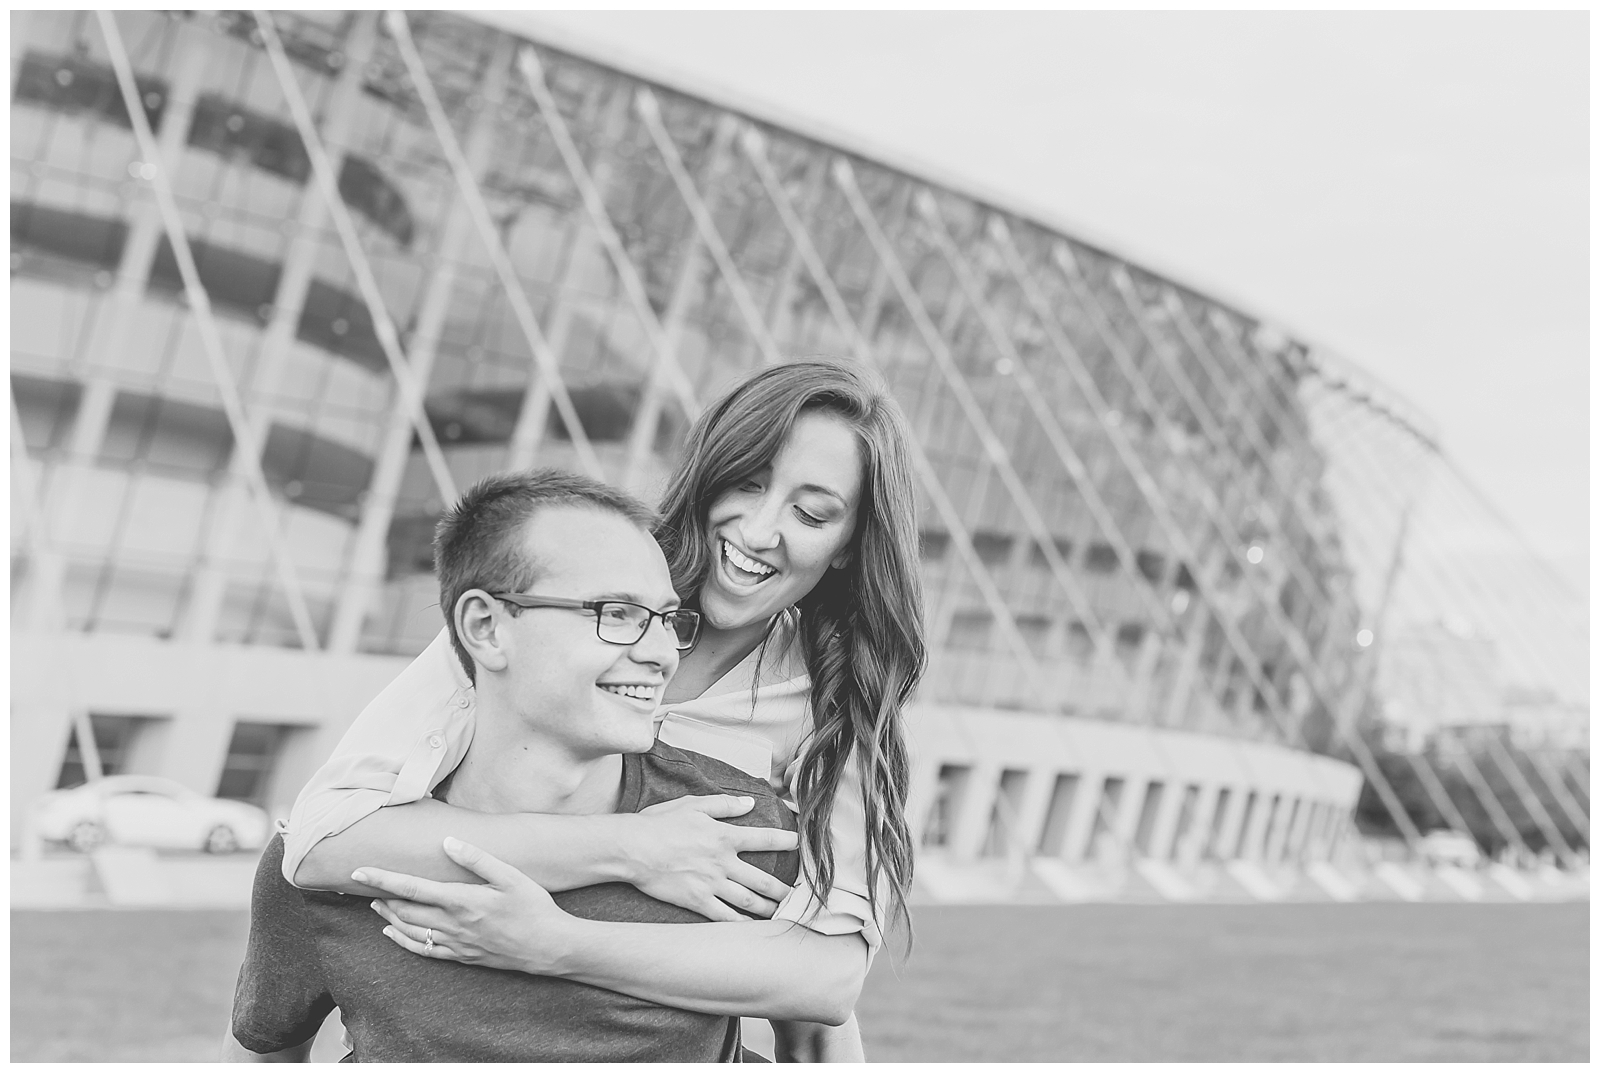 Engagement photography at the Kauffman Center for the Performing Arts and the Crossroads Arts District by Kansas City wedding photographers Wisdom-Watson Weddings.